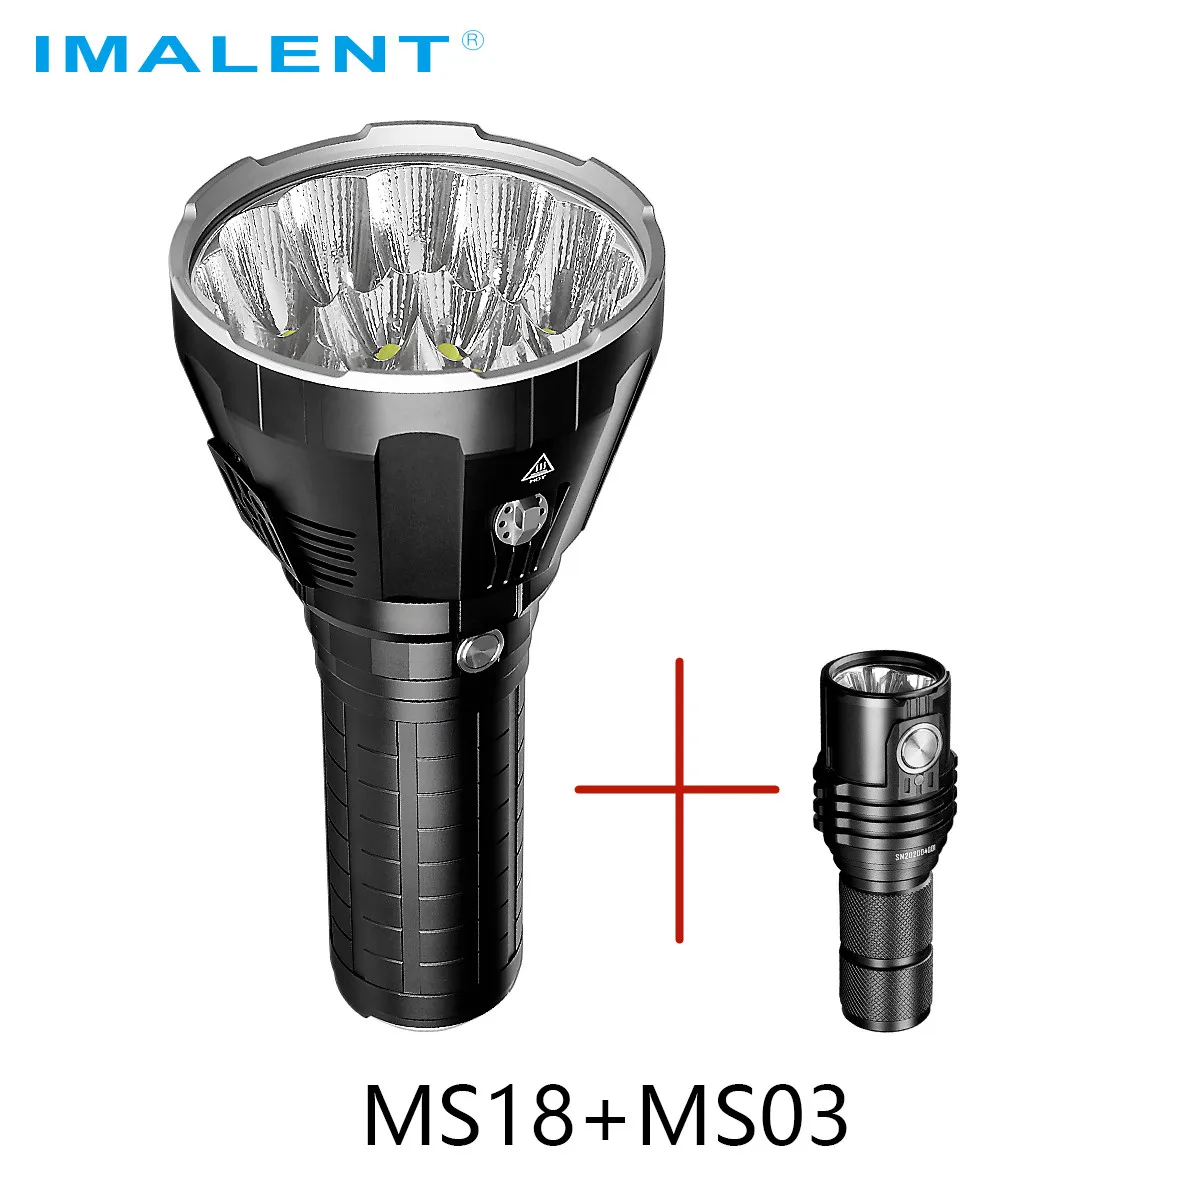 IMALENT MS18+MS03 Professional Convoy Flashlight Rechargeable 6-8 Mode 25000LM CREE XHP Led Lamp Brightest Lantern Batteries